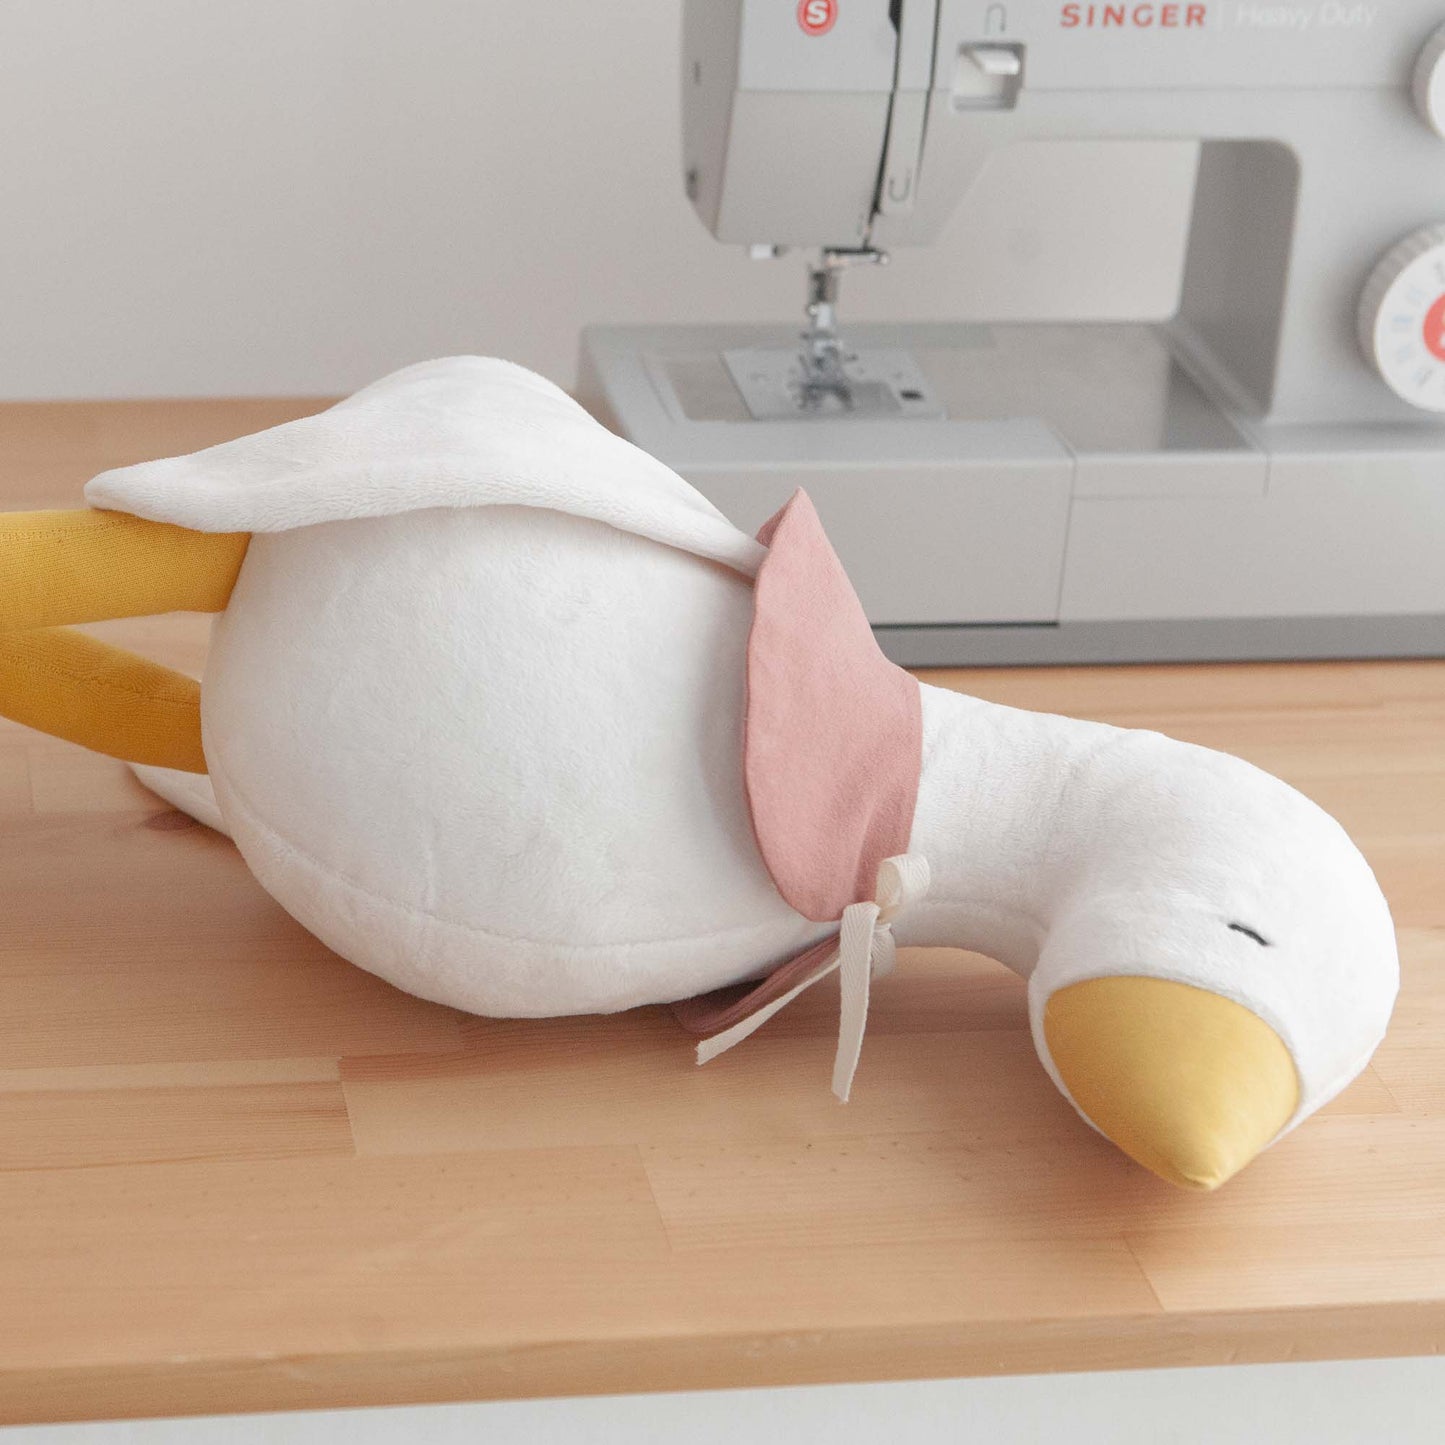 Handmade Plush Toy / Goose / baby room decor / 15 inches tall